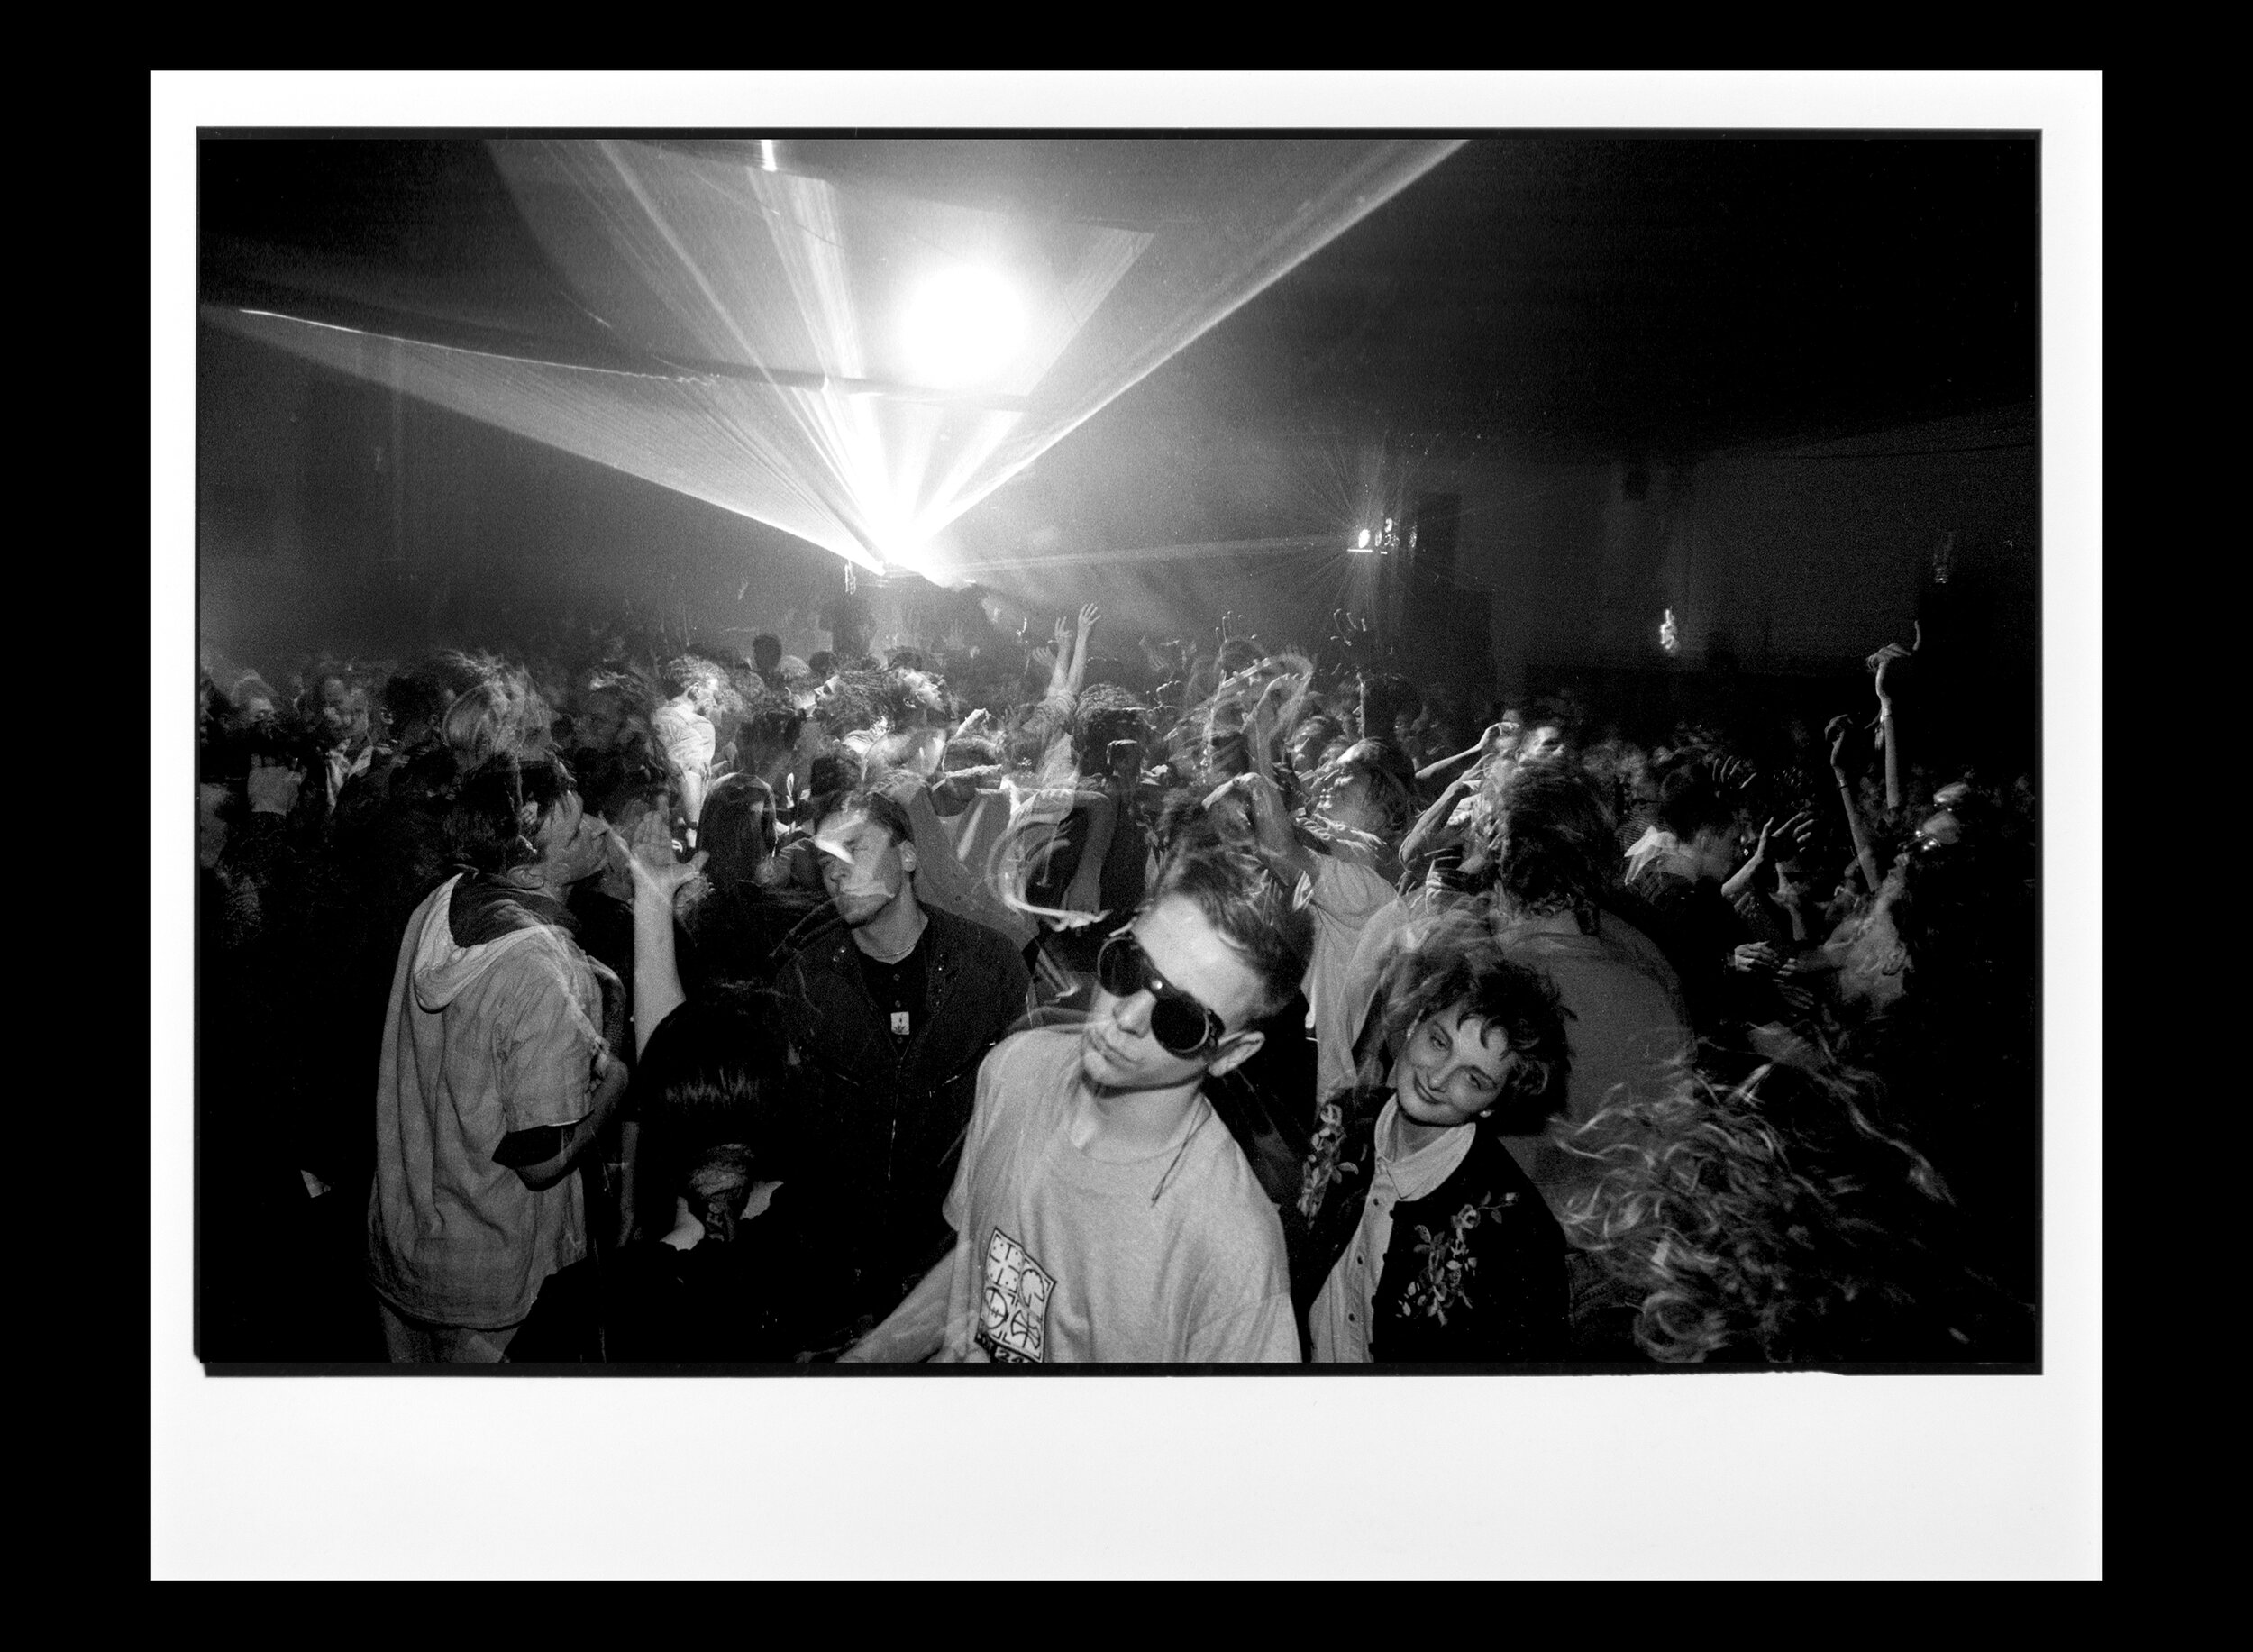  Dancers at techno rave in East Berlin's "House of Young Talent," hosted by hip young West Berlin entrepreneurs.  